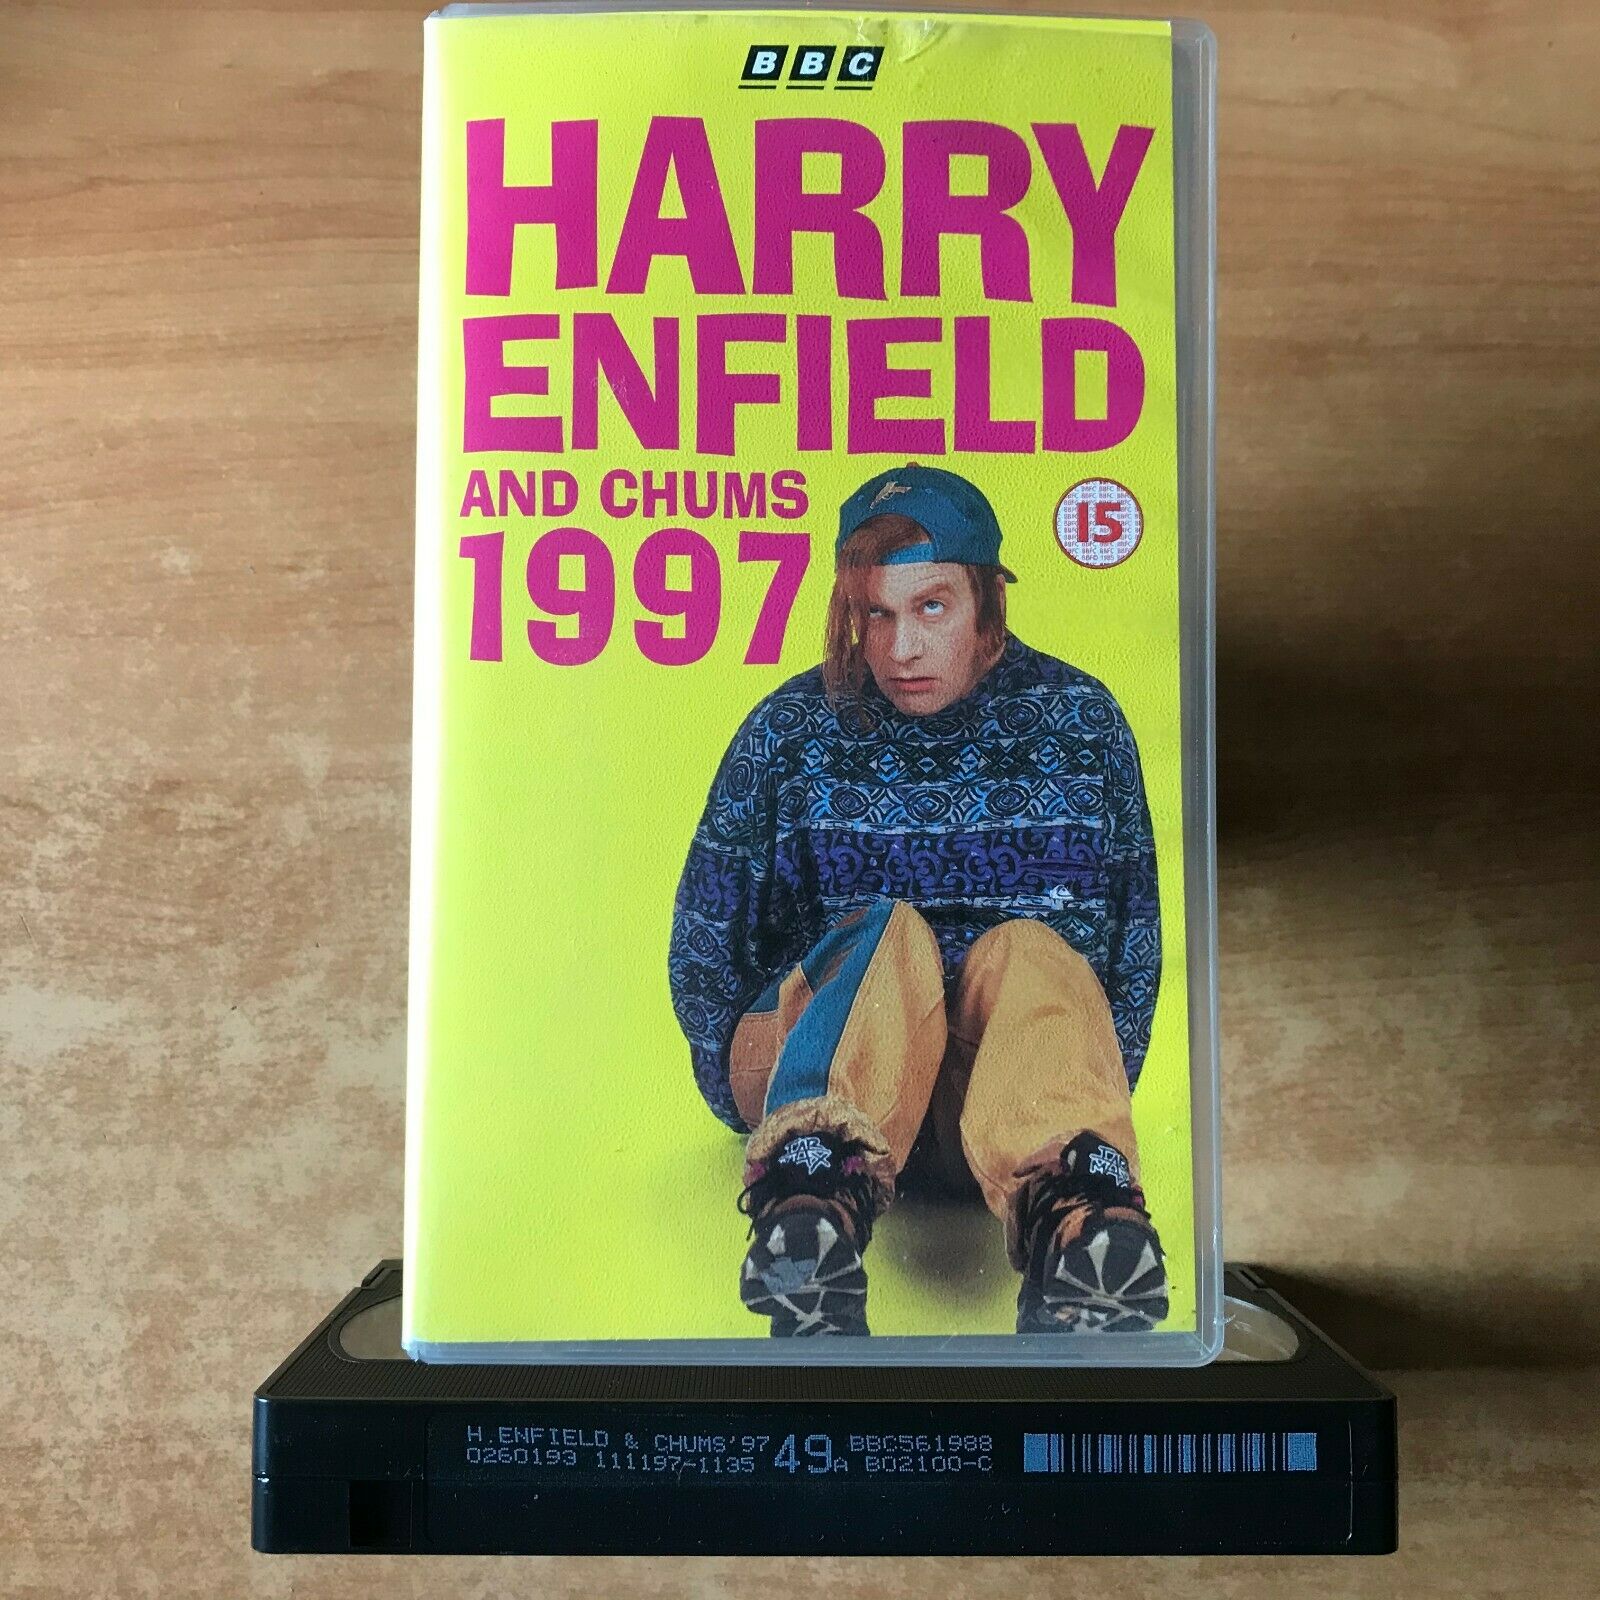 harry enfield americans in england｜TikTok Search